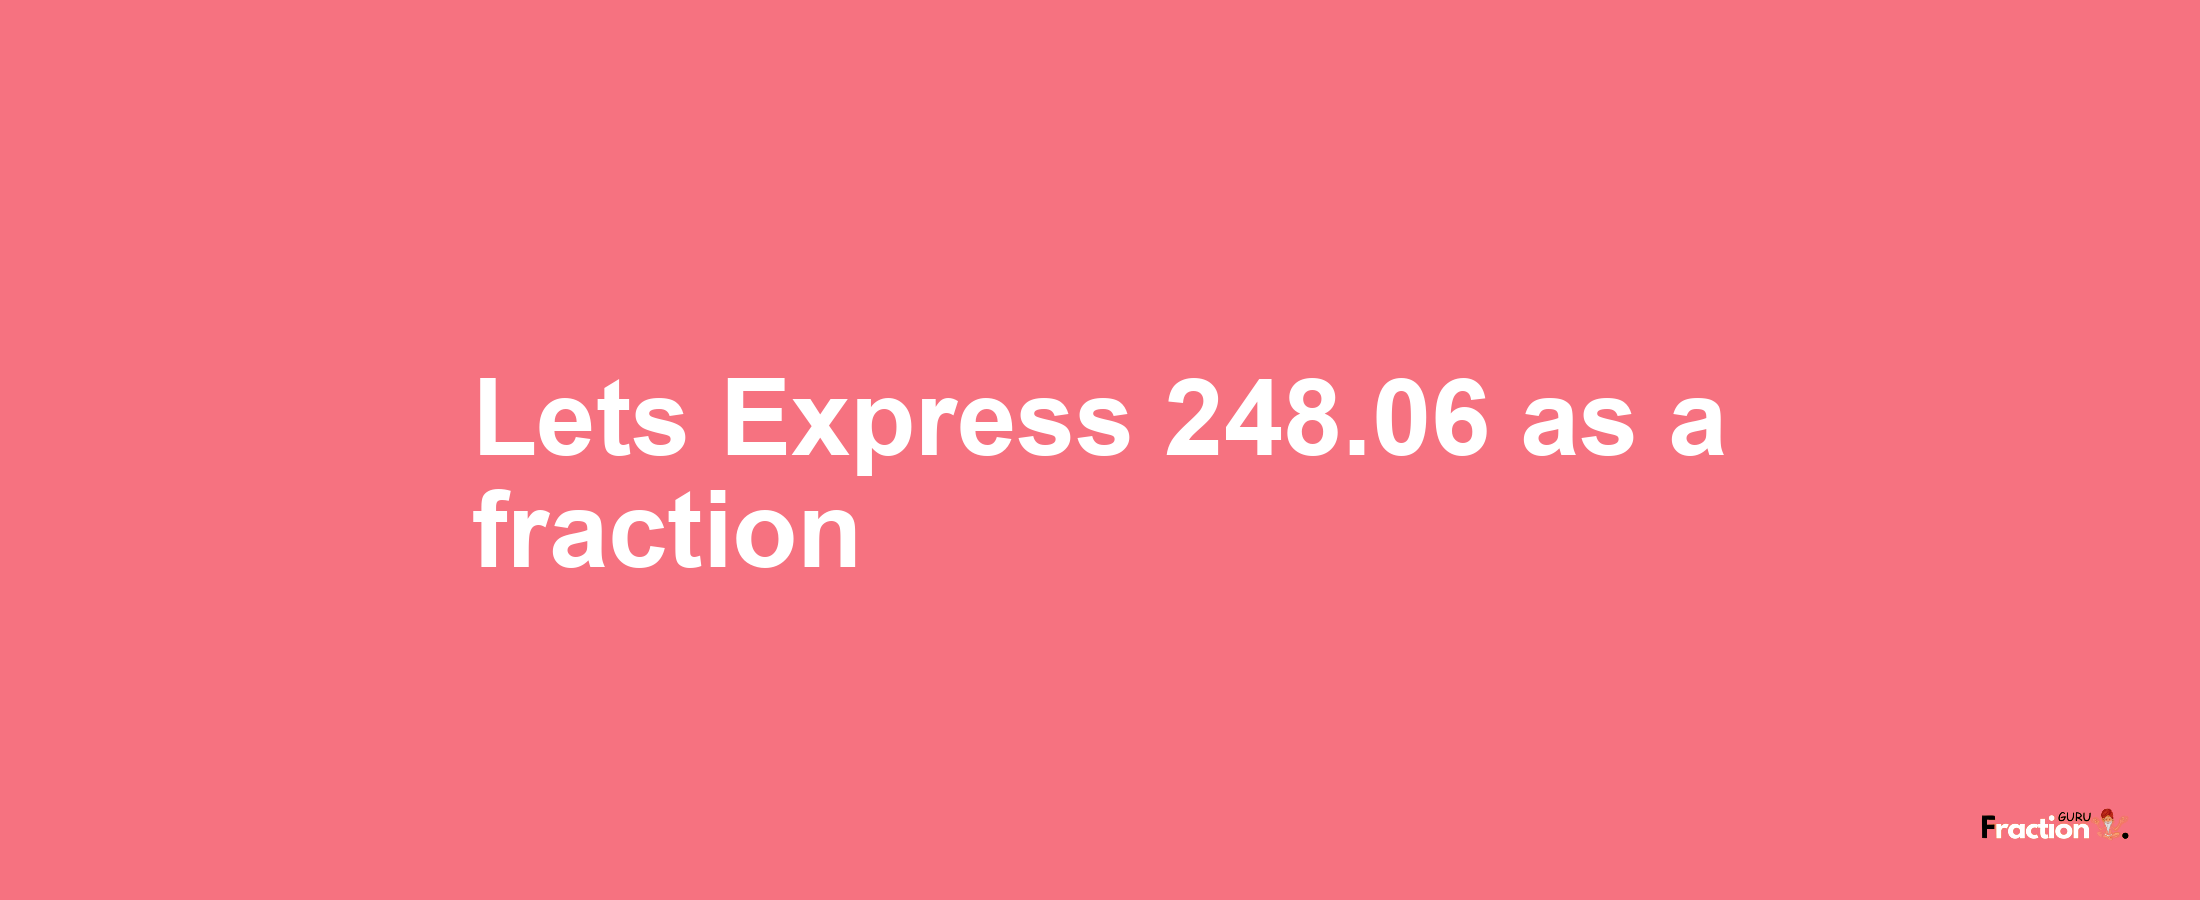 Lets Express 248.06 as afraction